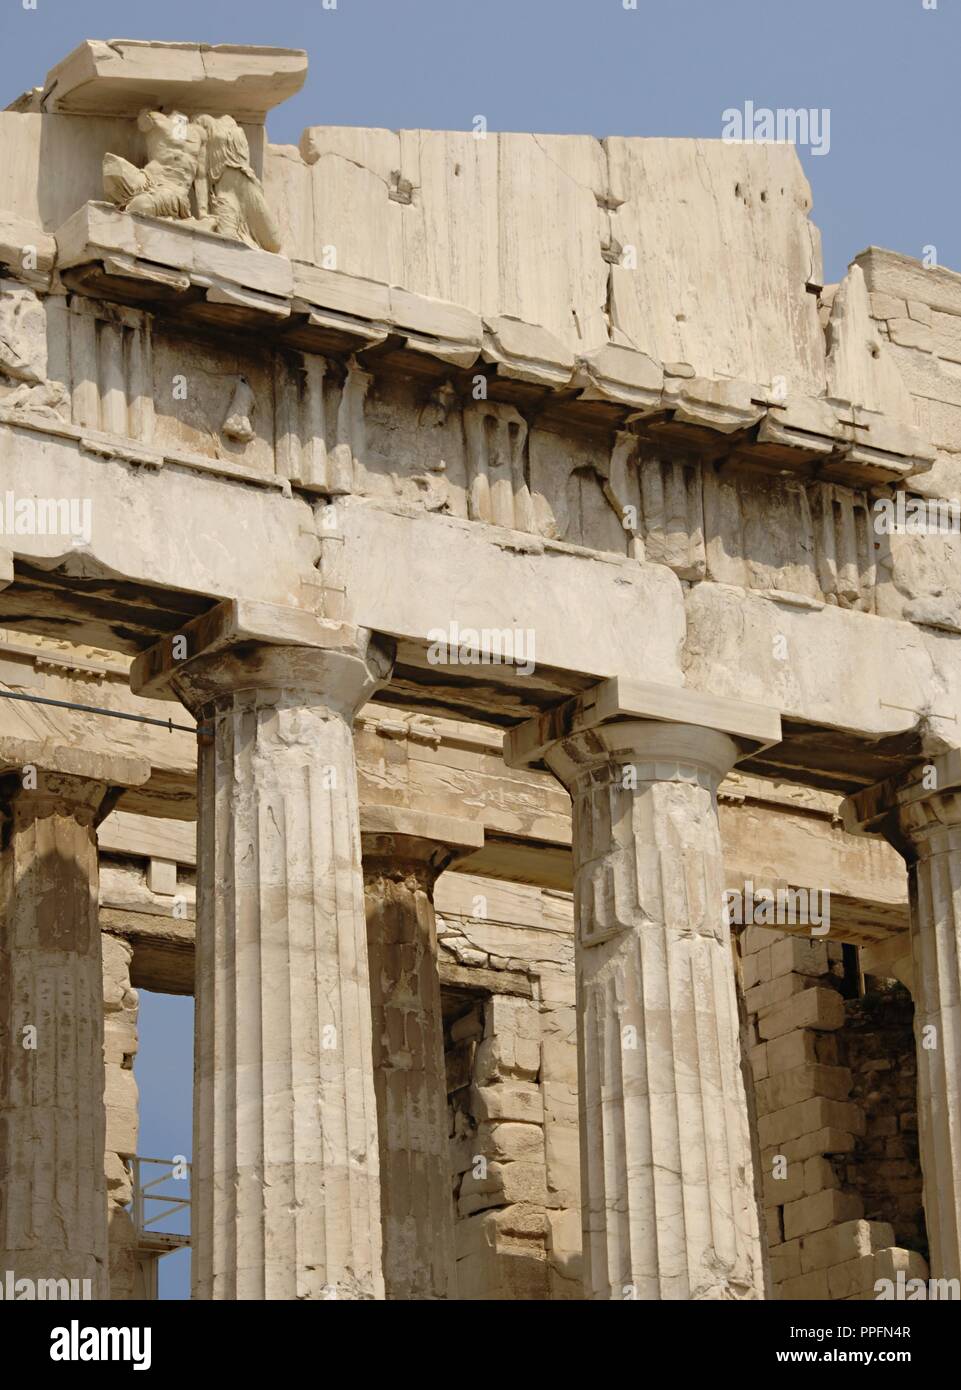 Greece. Athens. Parthenon. 447-438 BC. in Doric style under leadership of Pericles. The building was designed by the architects Ictinos and Callicrates. Acropolis. Stock Photo